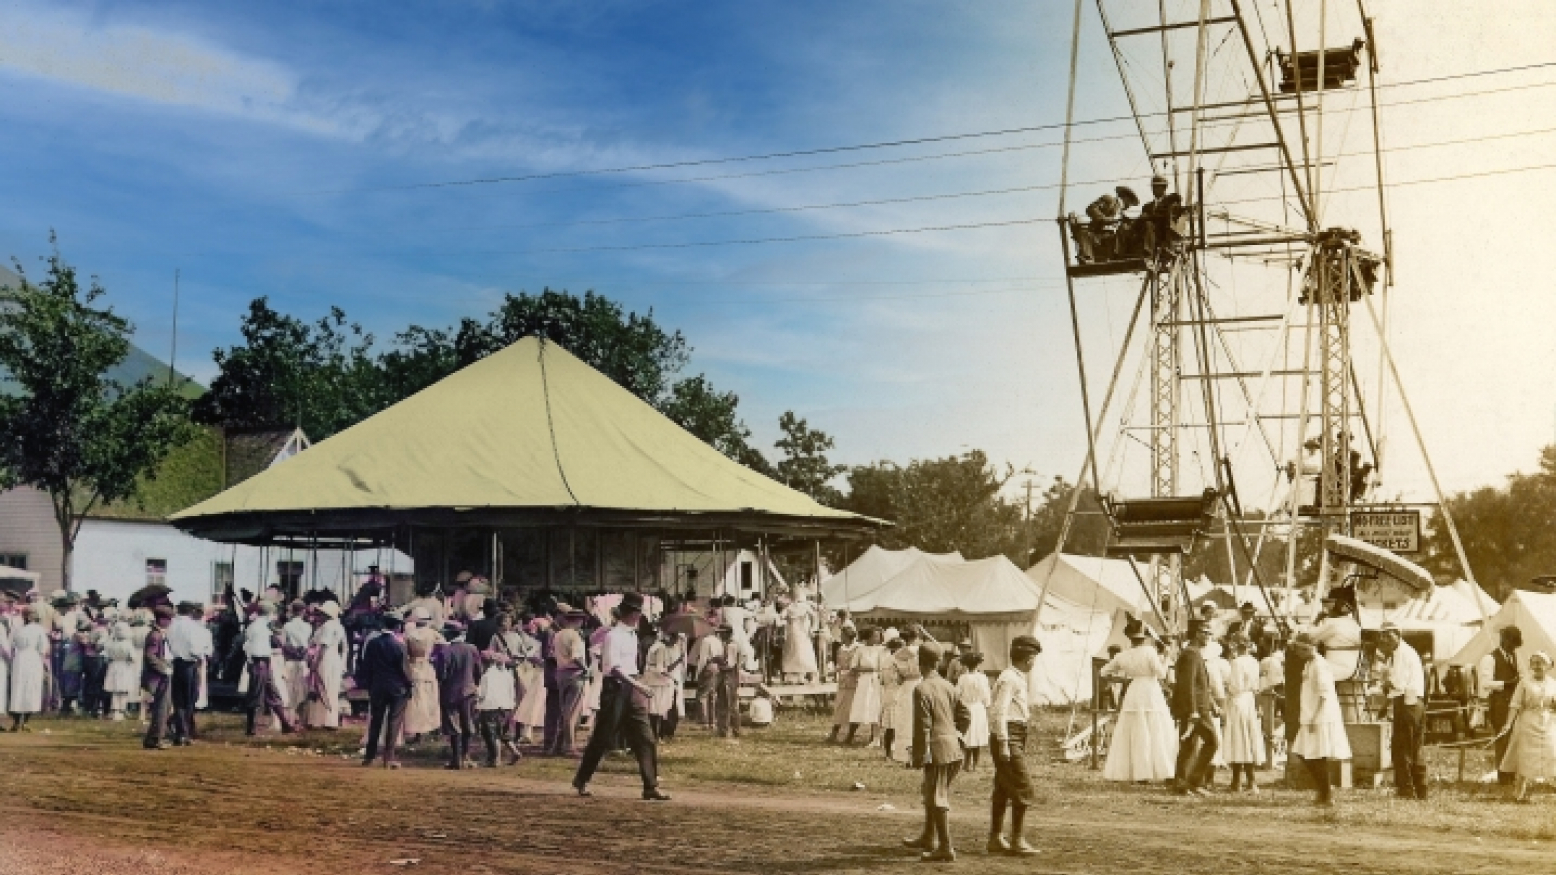 A semi-colorized archival image of fairgoers at the Iowa State Fair. People of all ages are standing and walking around and through tents. A ferris wheel is in the background of the right side of the image.